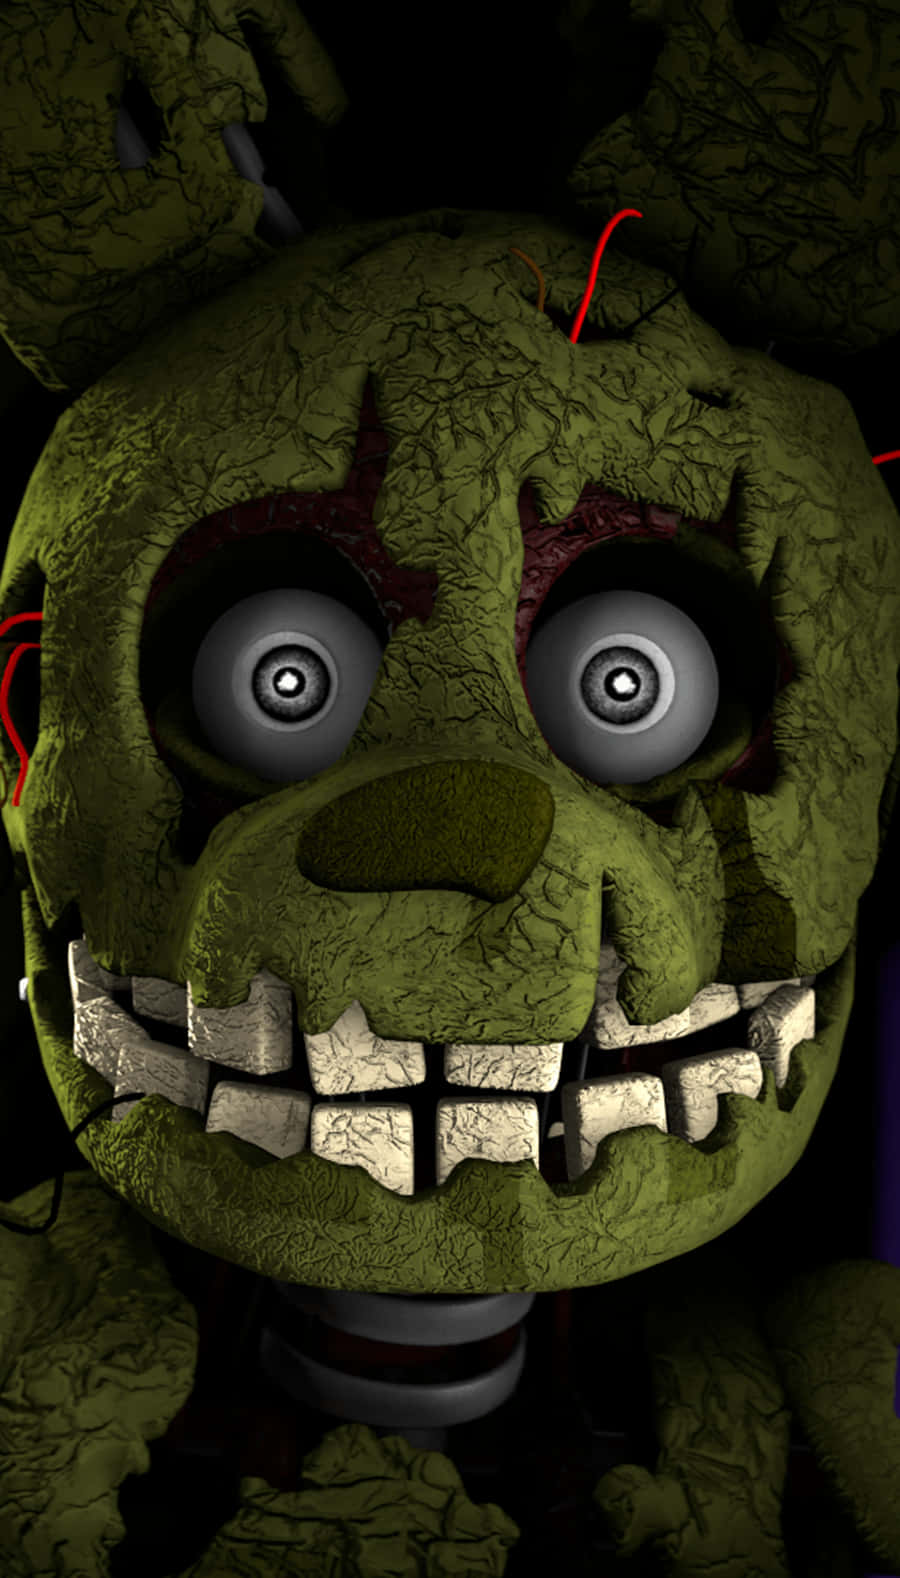 Five Nights At Freddy's - A Green Monster With A Scary Face Background